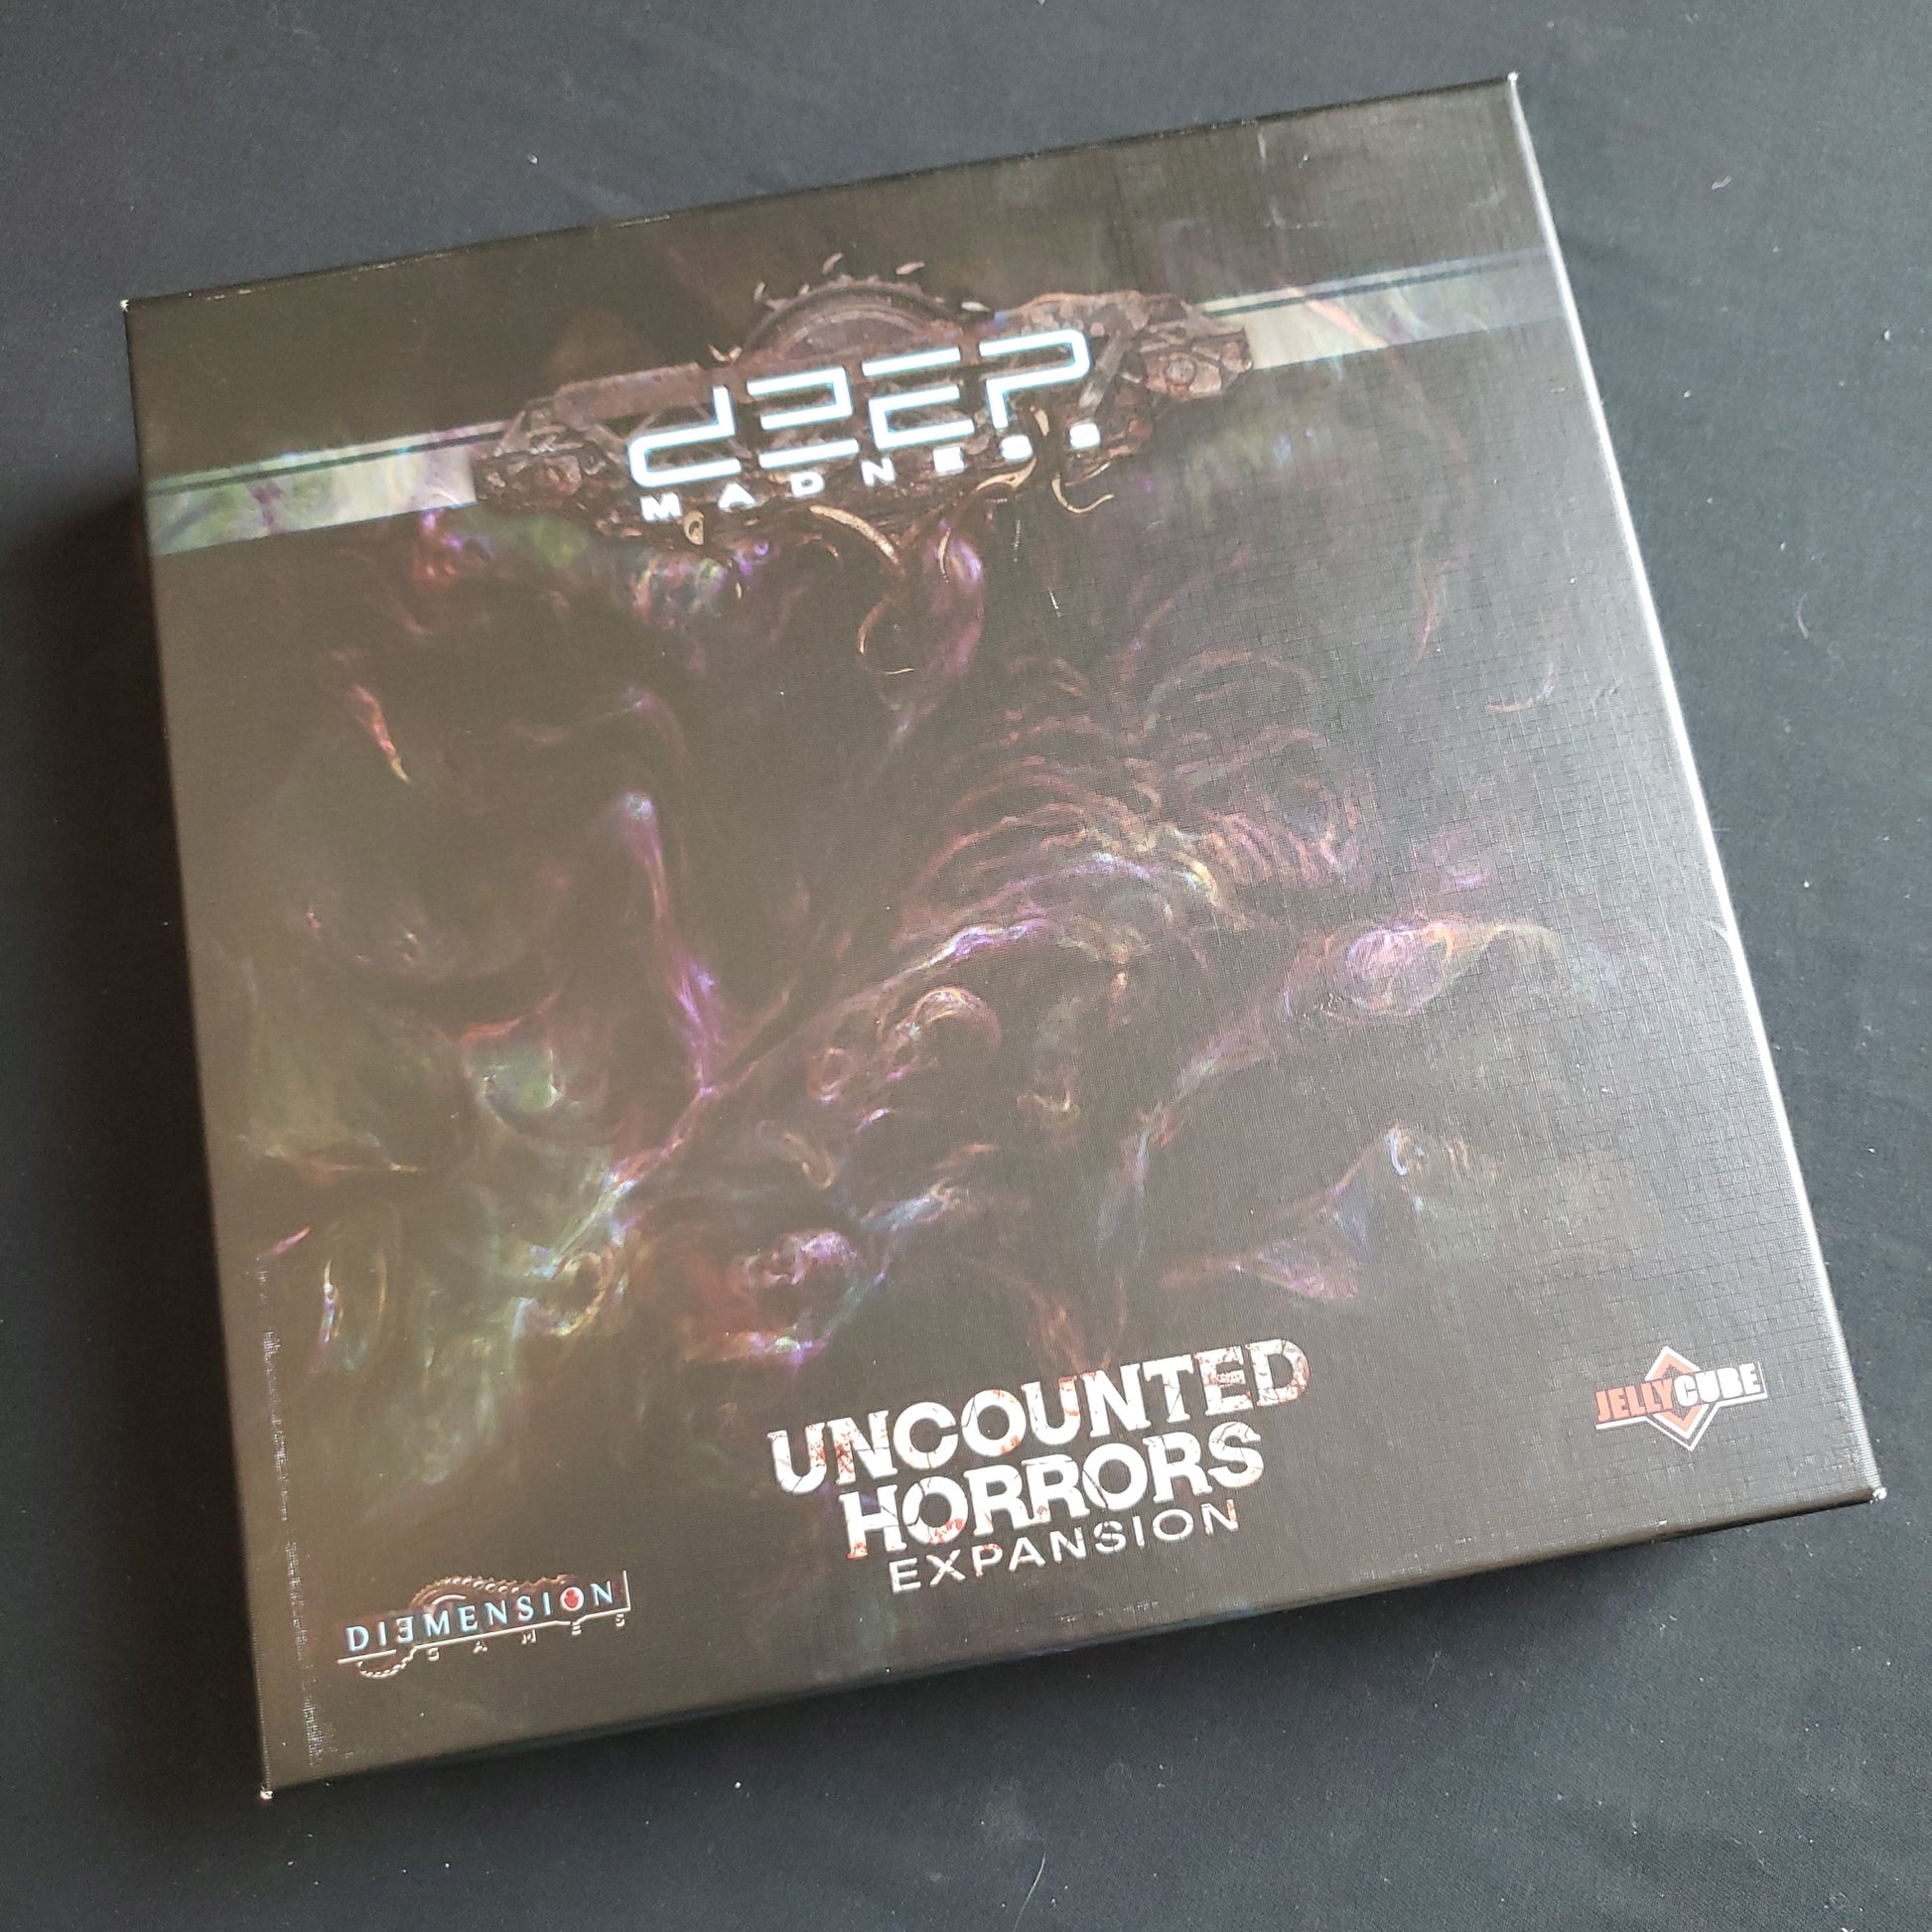 Image shows the front cover of the box of the Uncounted Horrors expansion for the Deep Madness board game